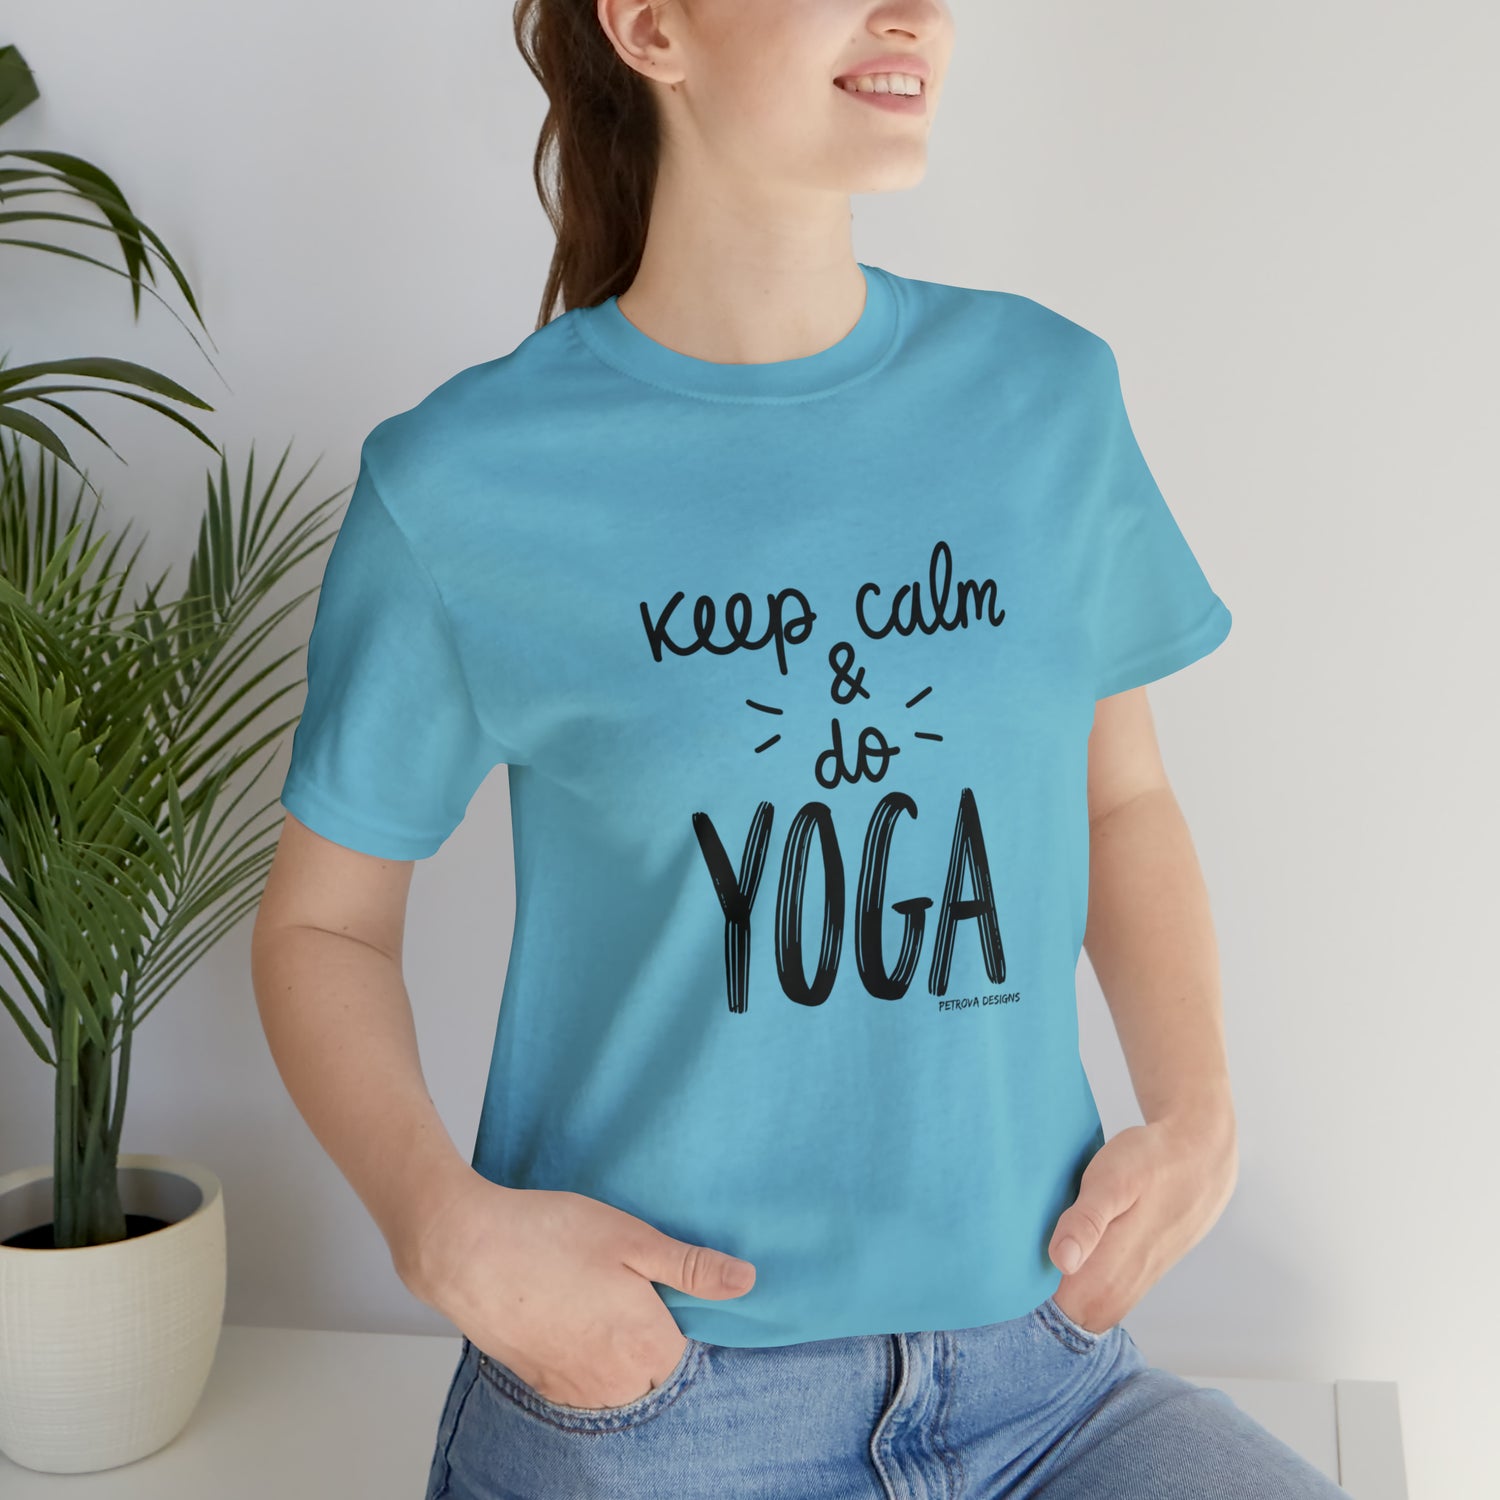 Turquoise T-Shirt Tshirt Design Gift for Friend and Family Short Sleeved Shirt Yoga Petrova Designs